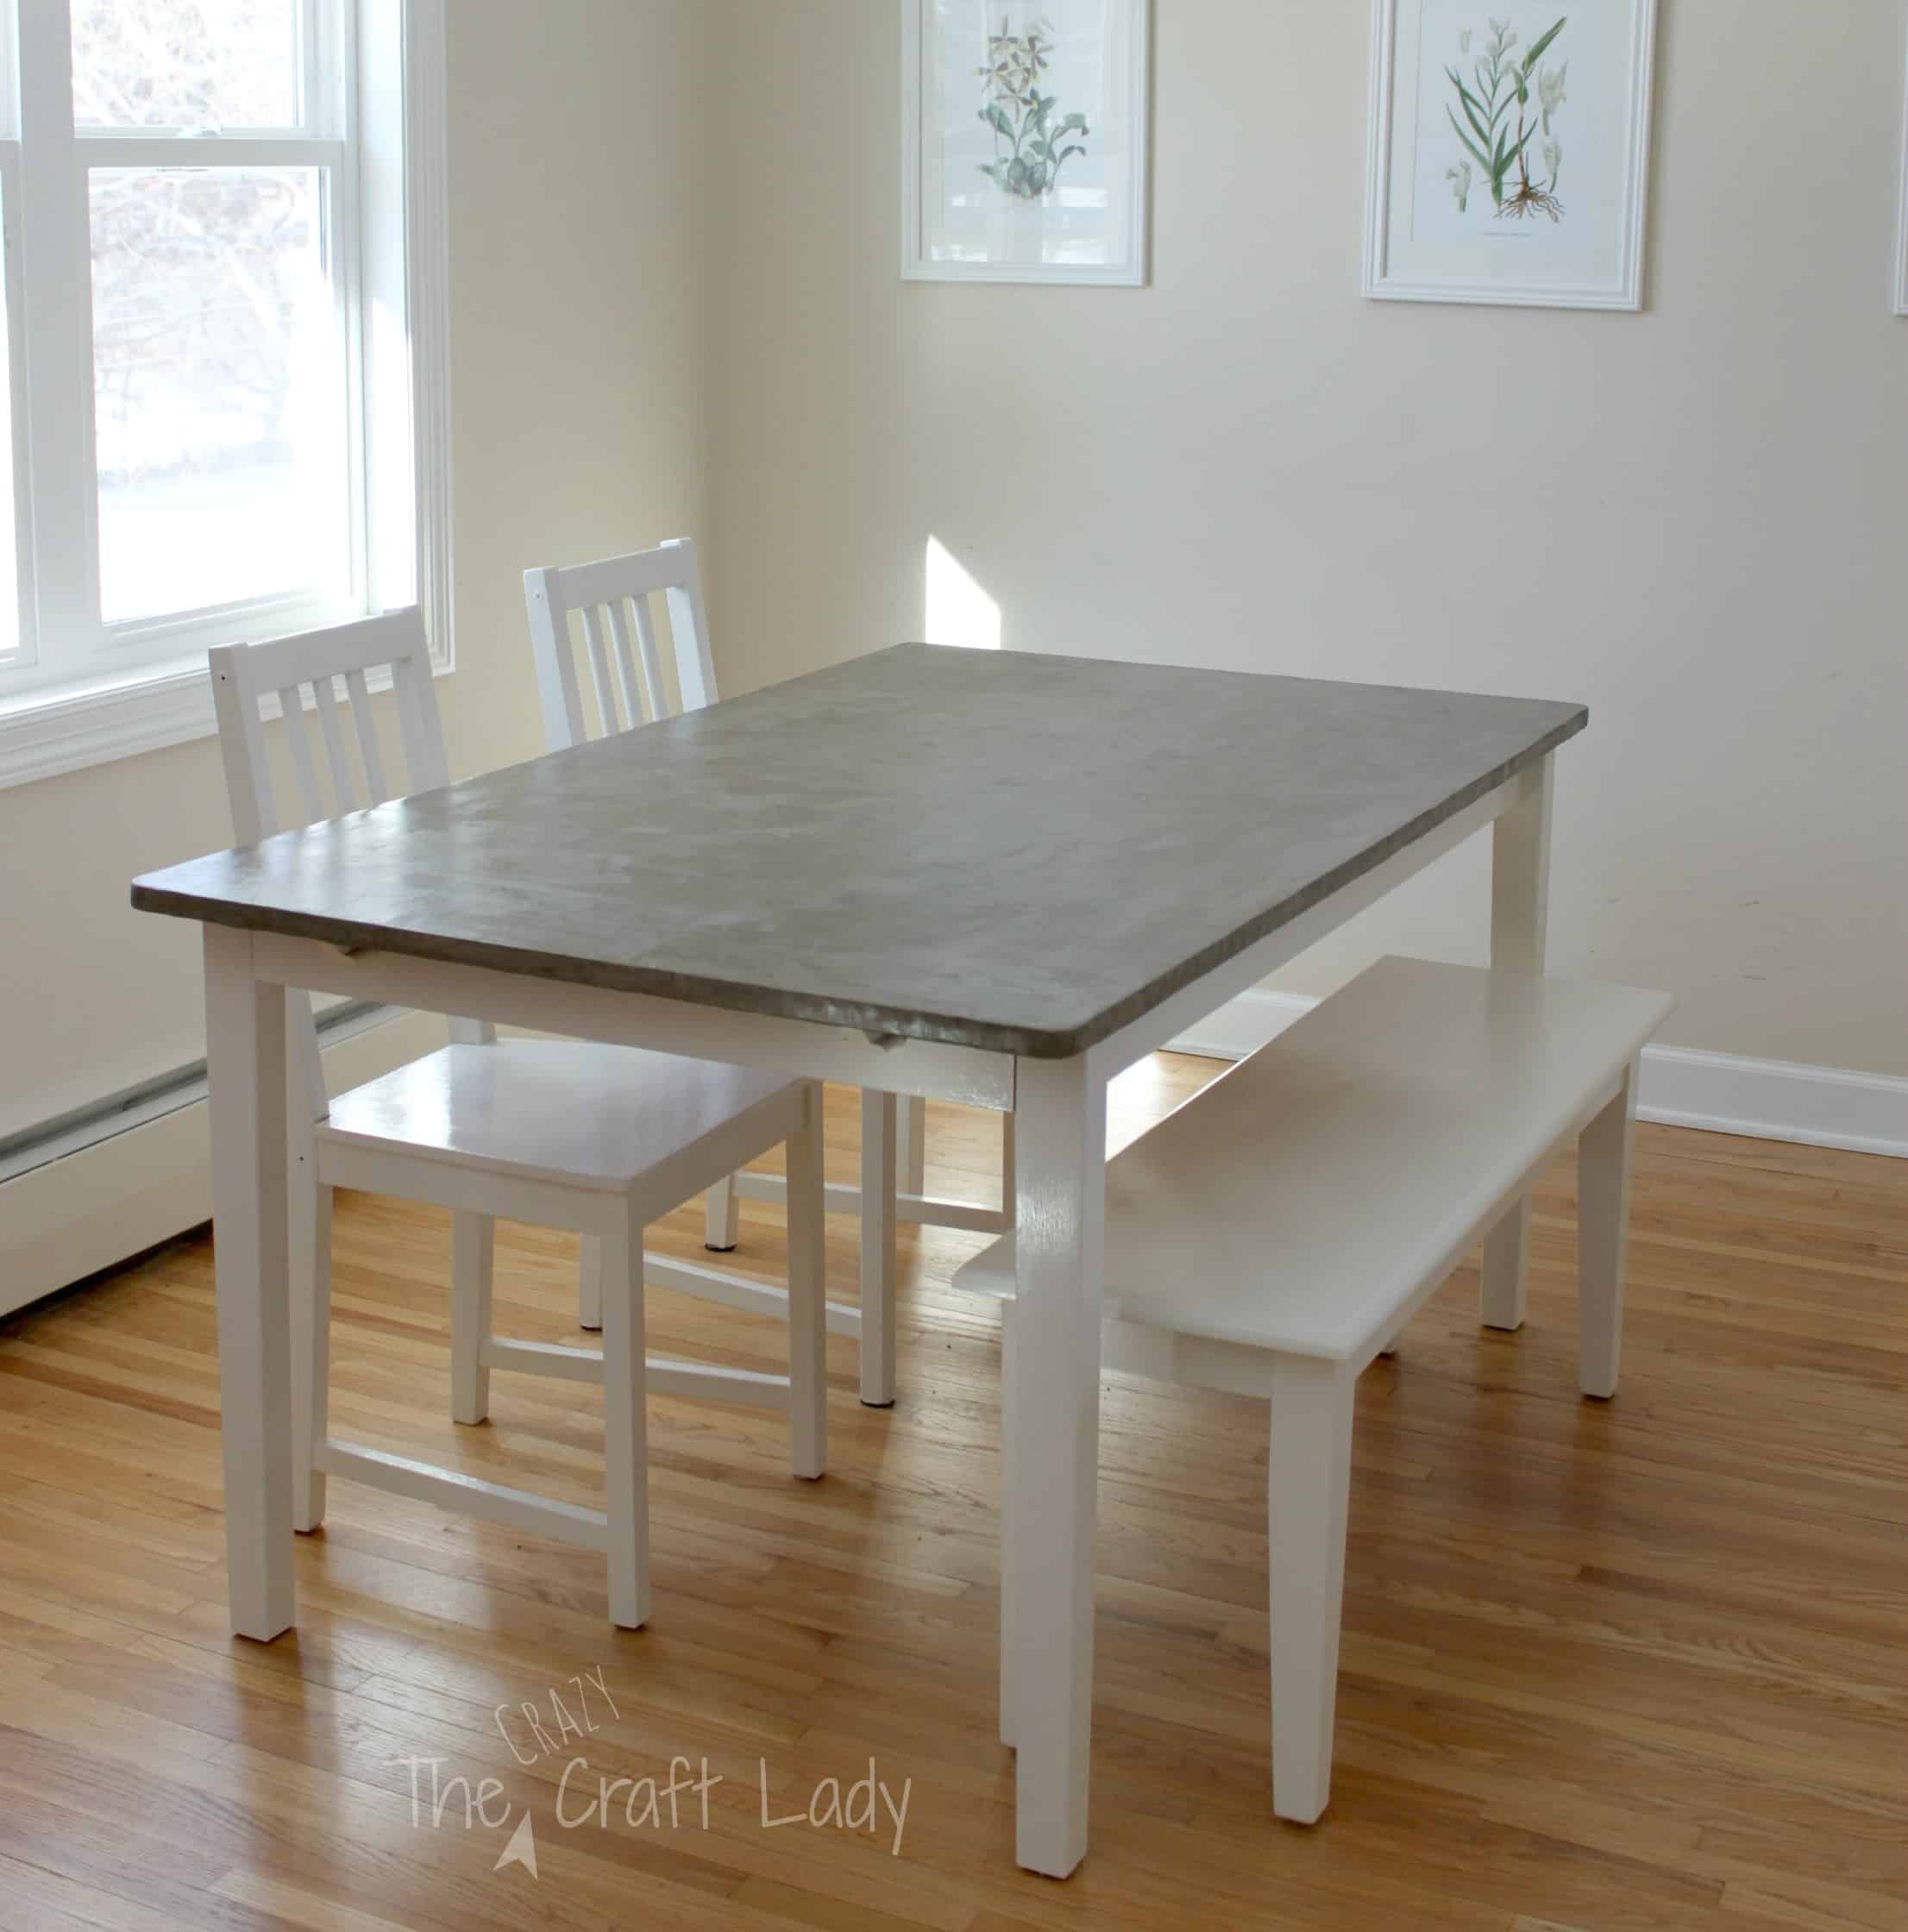 Diy concrete dining room table